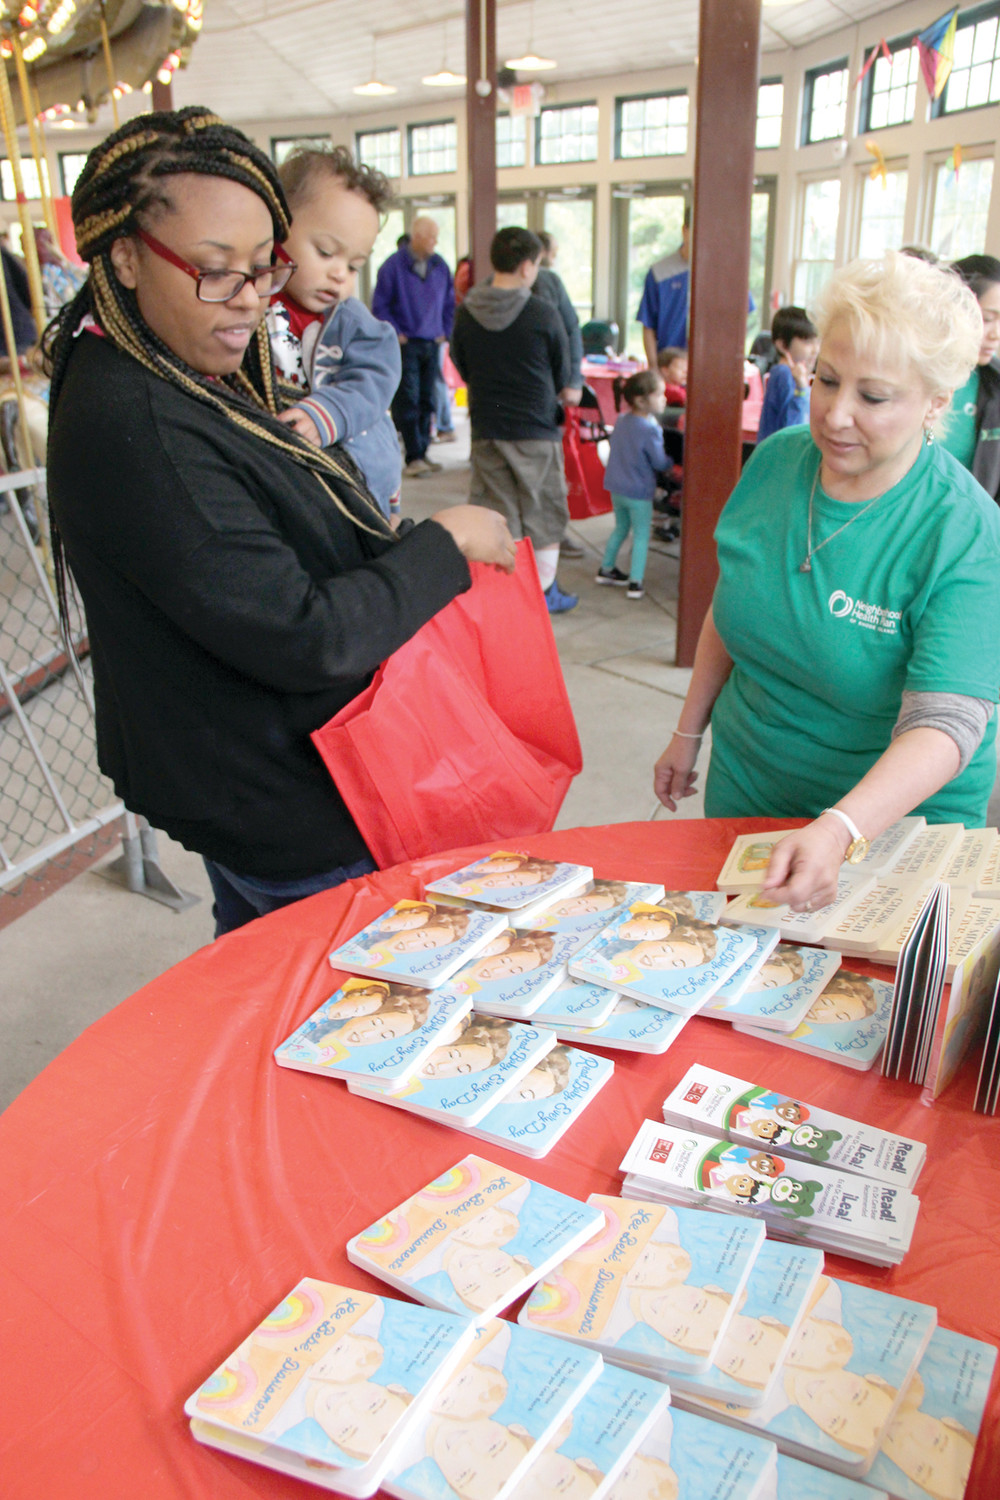 ALL ABOUT READING AND BOOKS: People were encouraged to take children’s books at the event as long as they would be reading them to children.